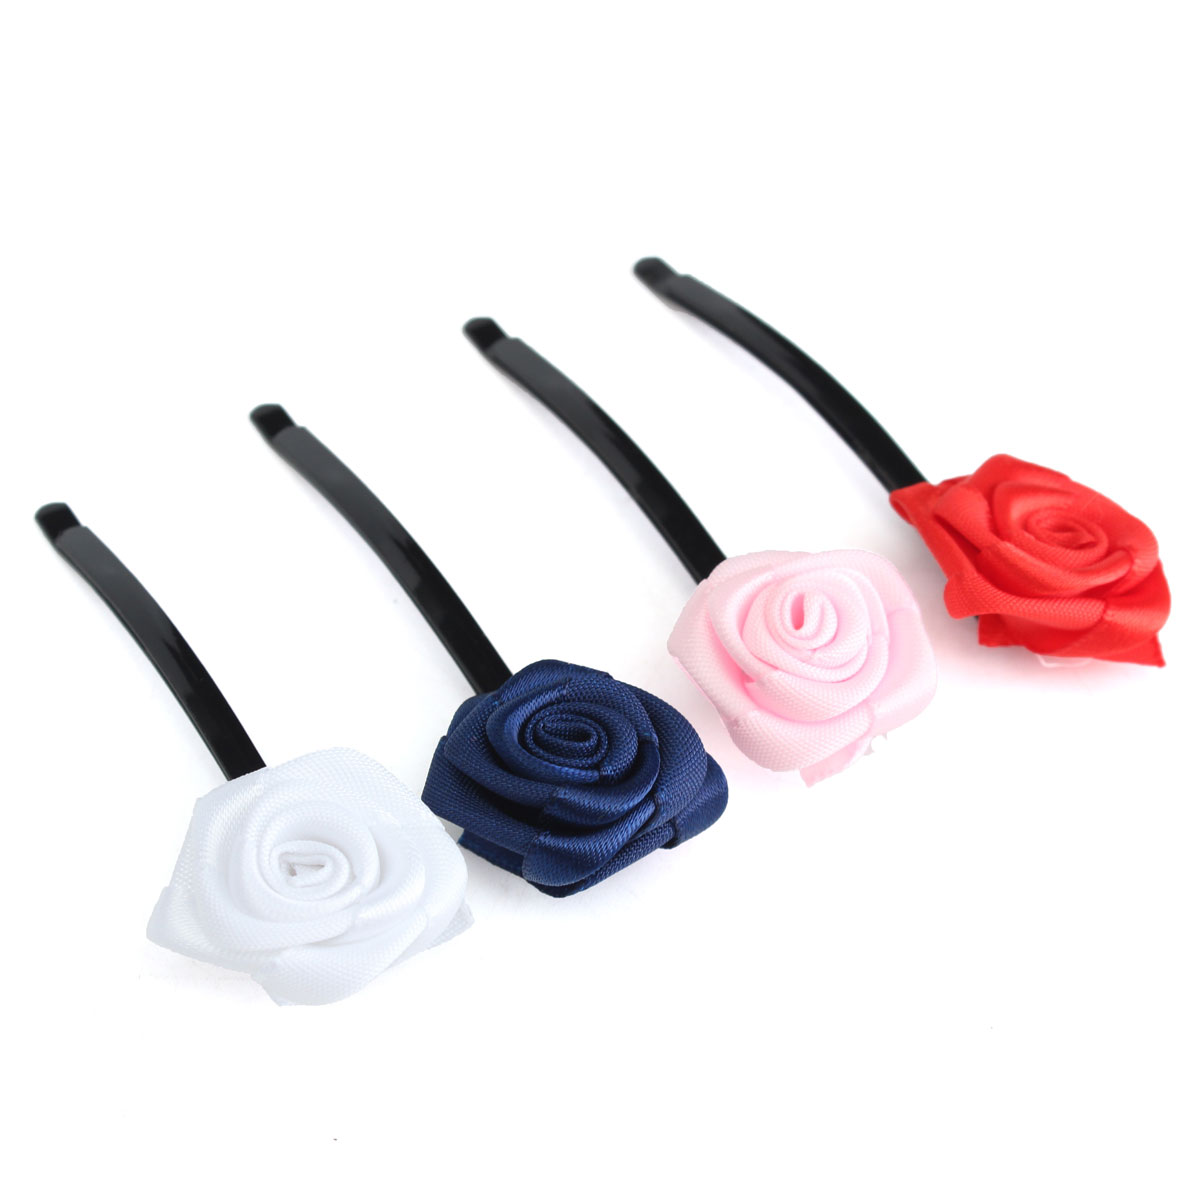 6pcs-Rose-Flowers-Hair-Pins-Grips-Clips-Accessories-for-Wedding-Party-1037583-7